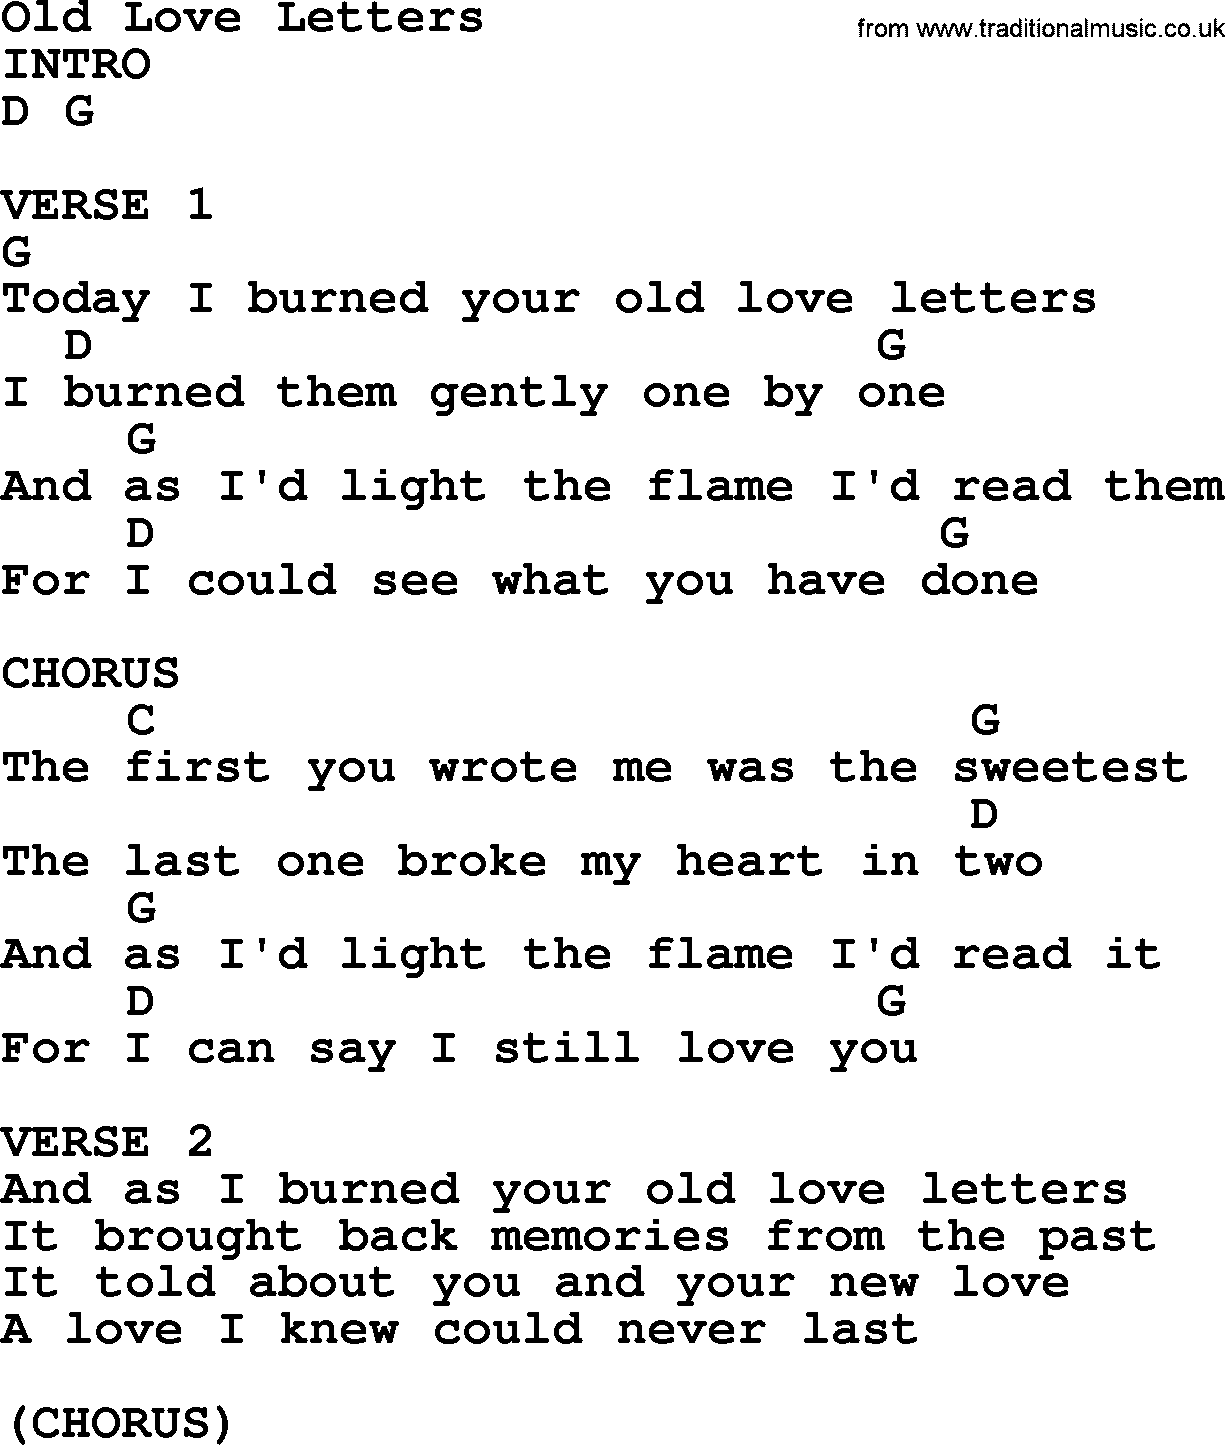 Bluegrass song: Old Love Letters, lyrics and chords